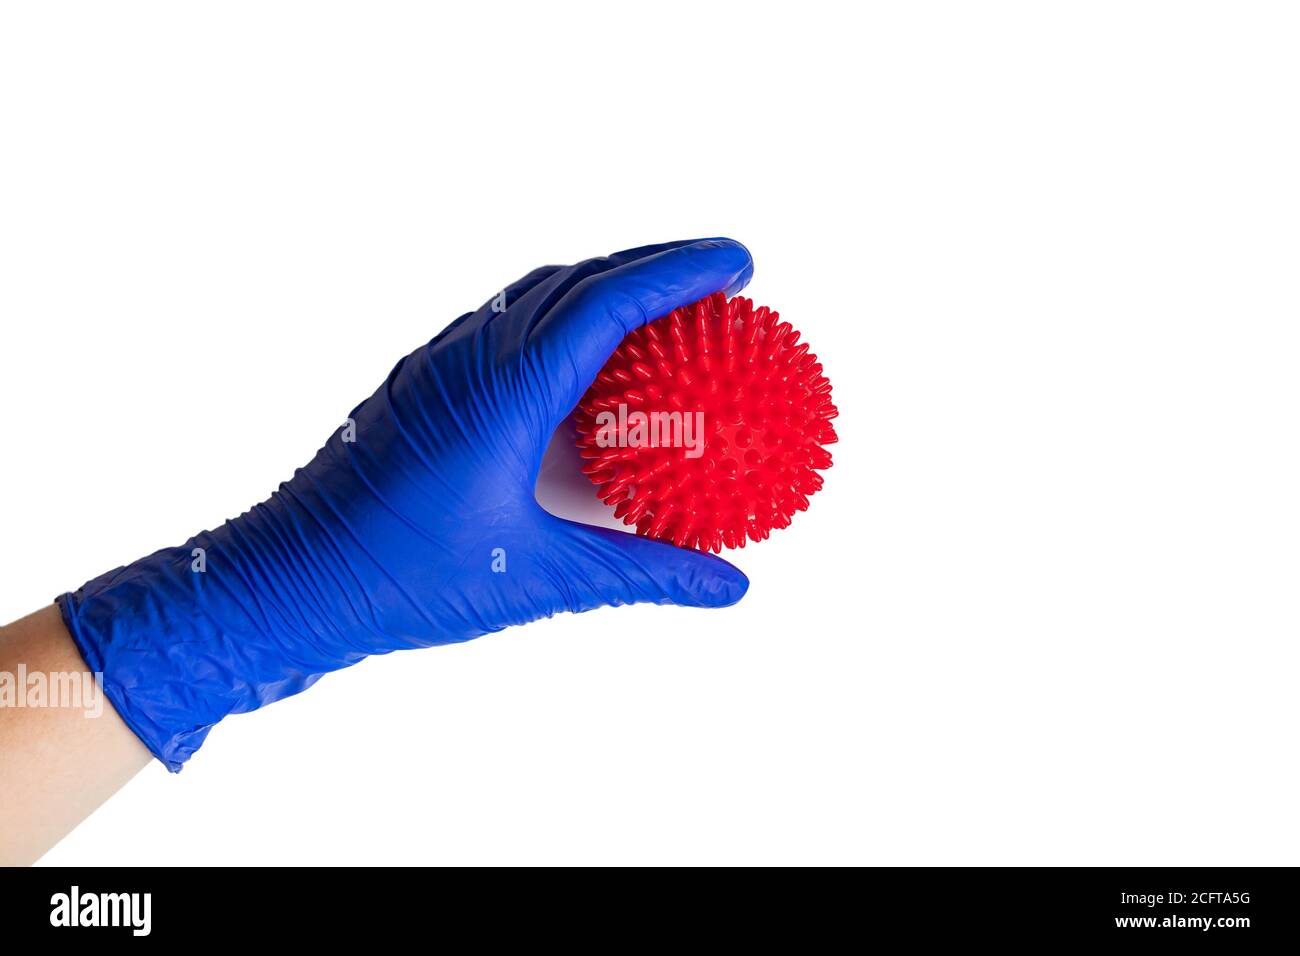 Coronavirus protection concept. The use of latex gloves during a pandemic. Health care. Stock Photo